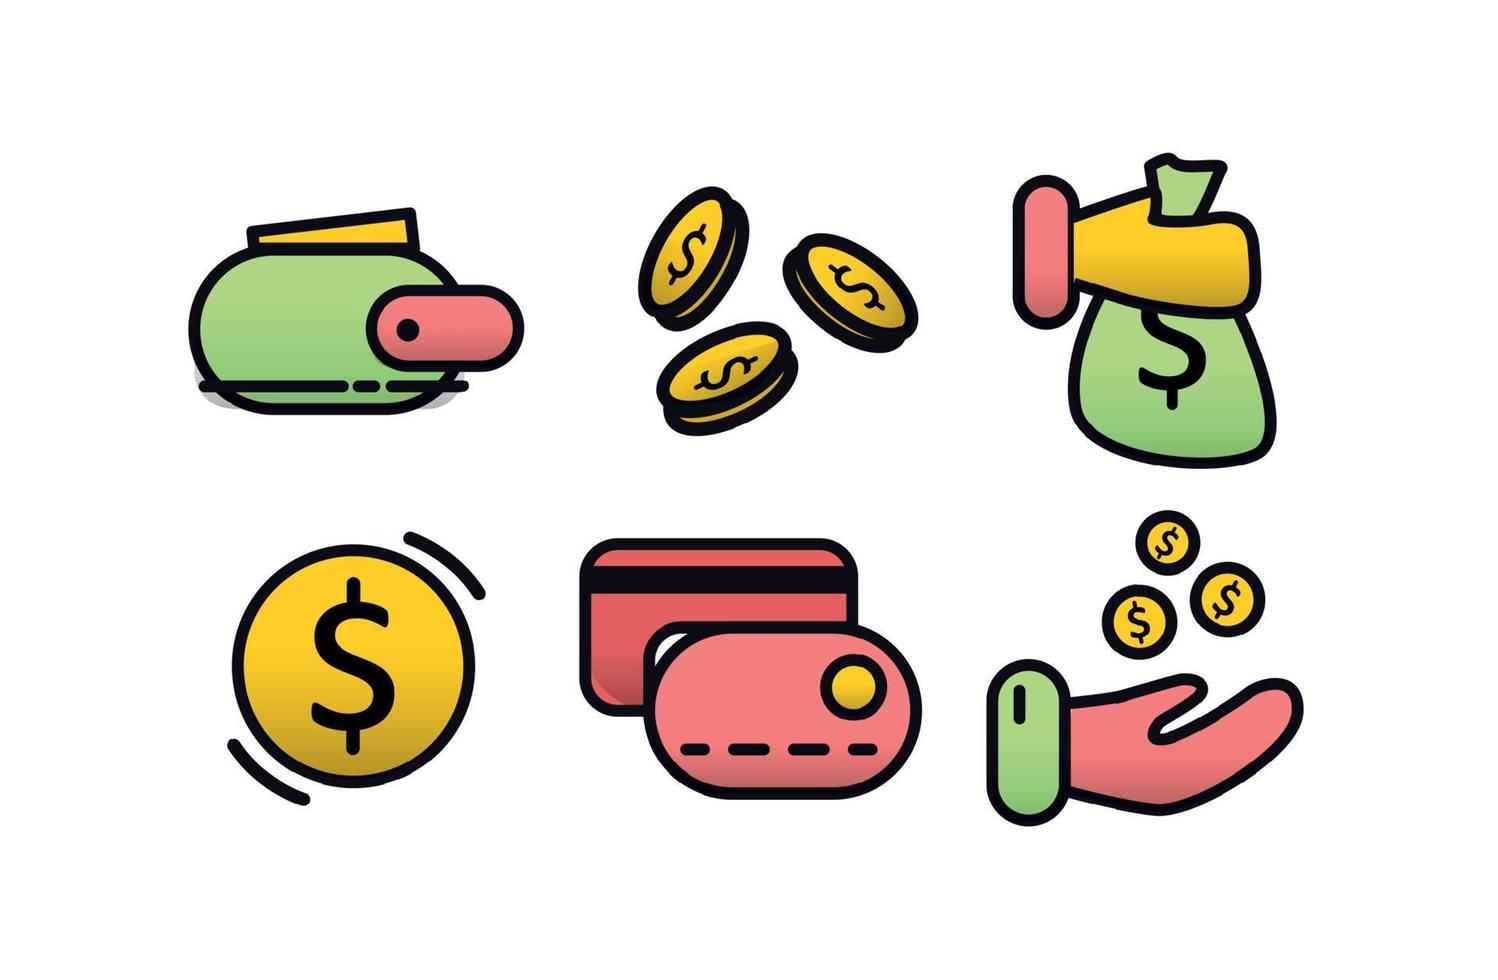 wallet with money, bag of money in hand, hand with coins, money icons vector